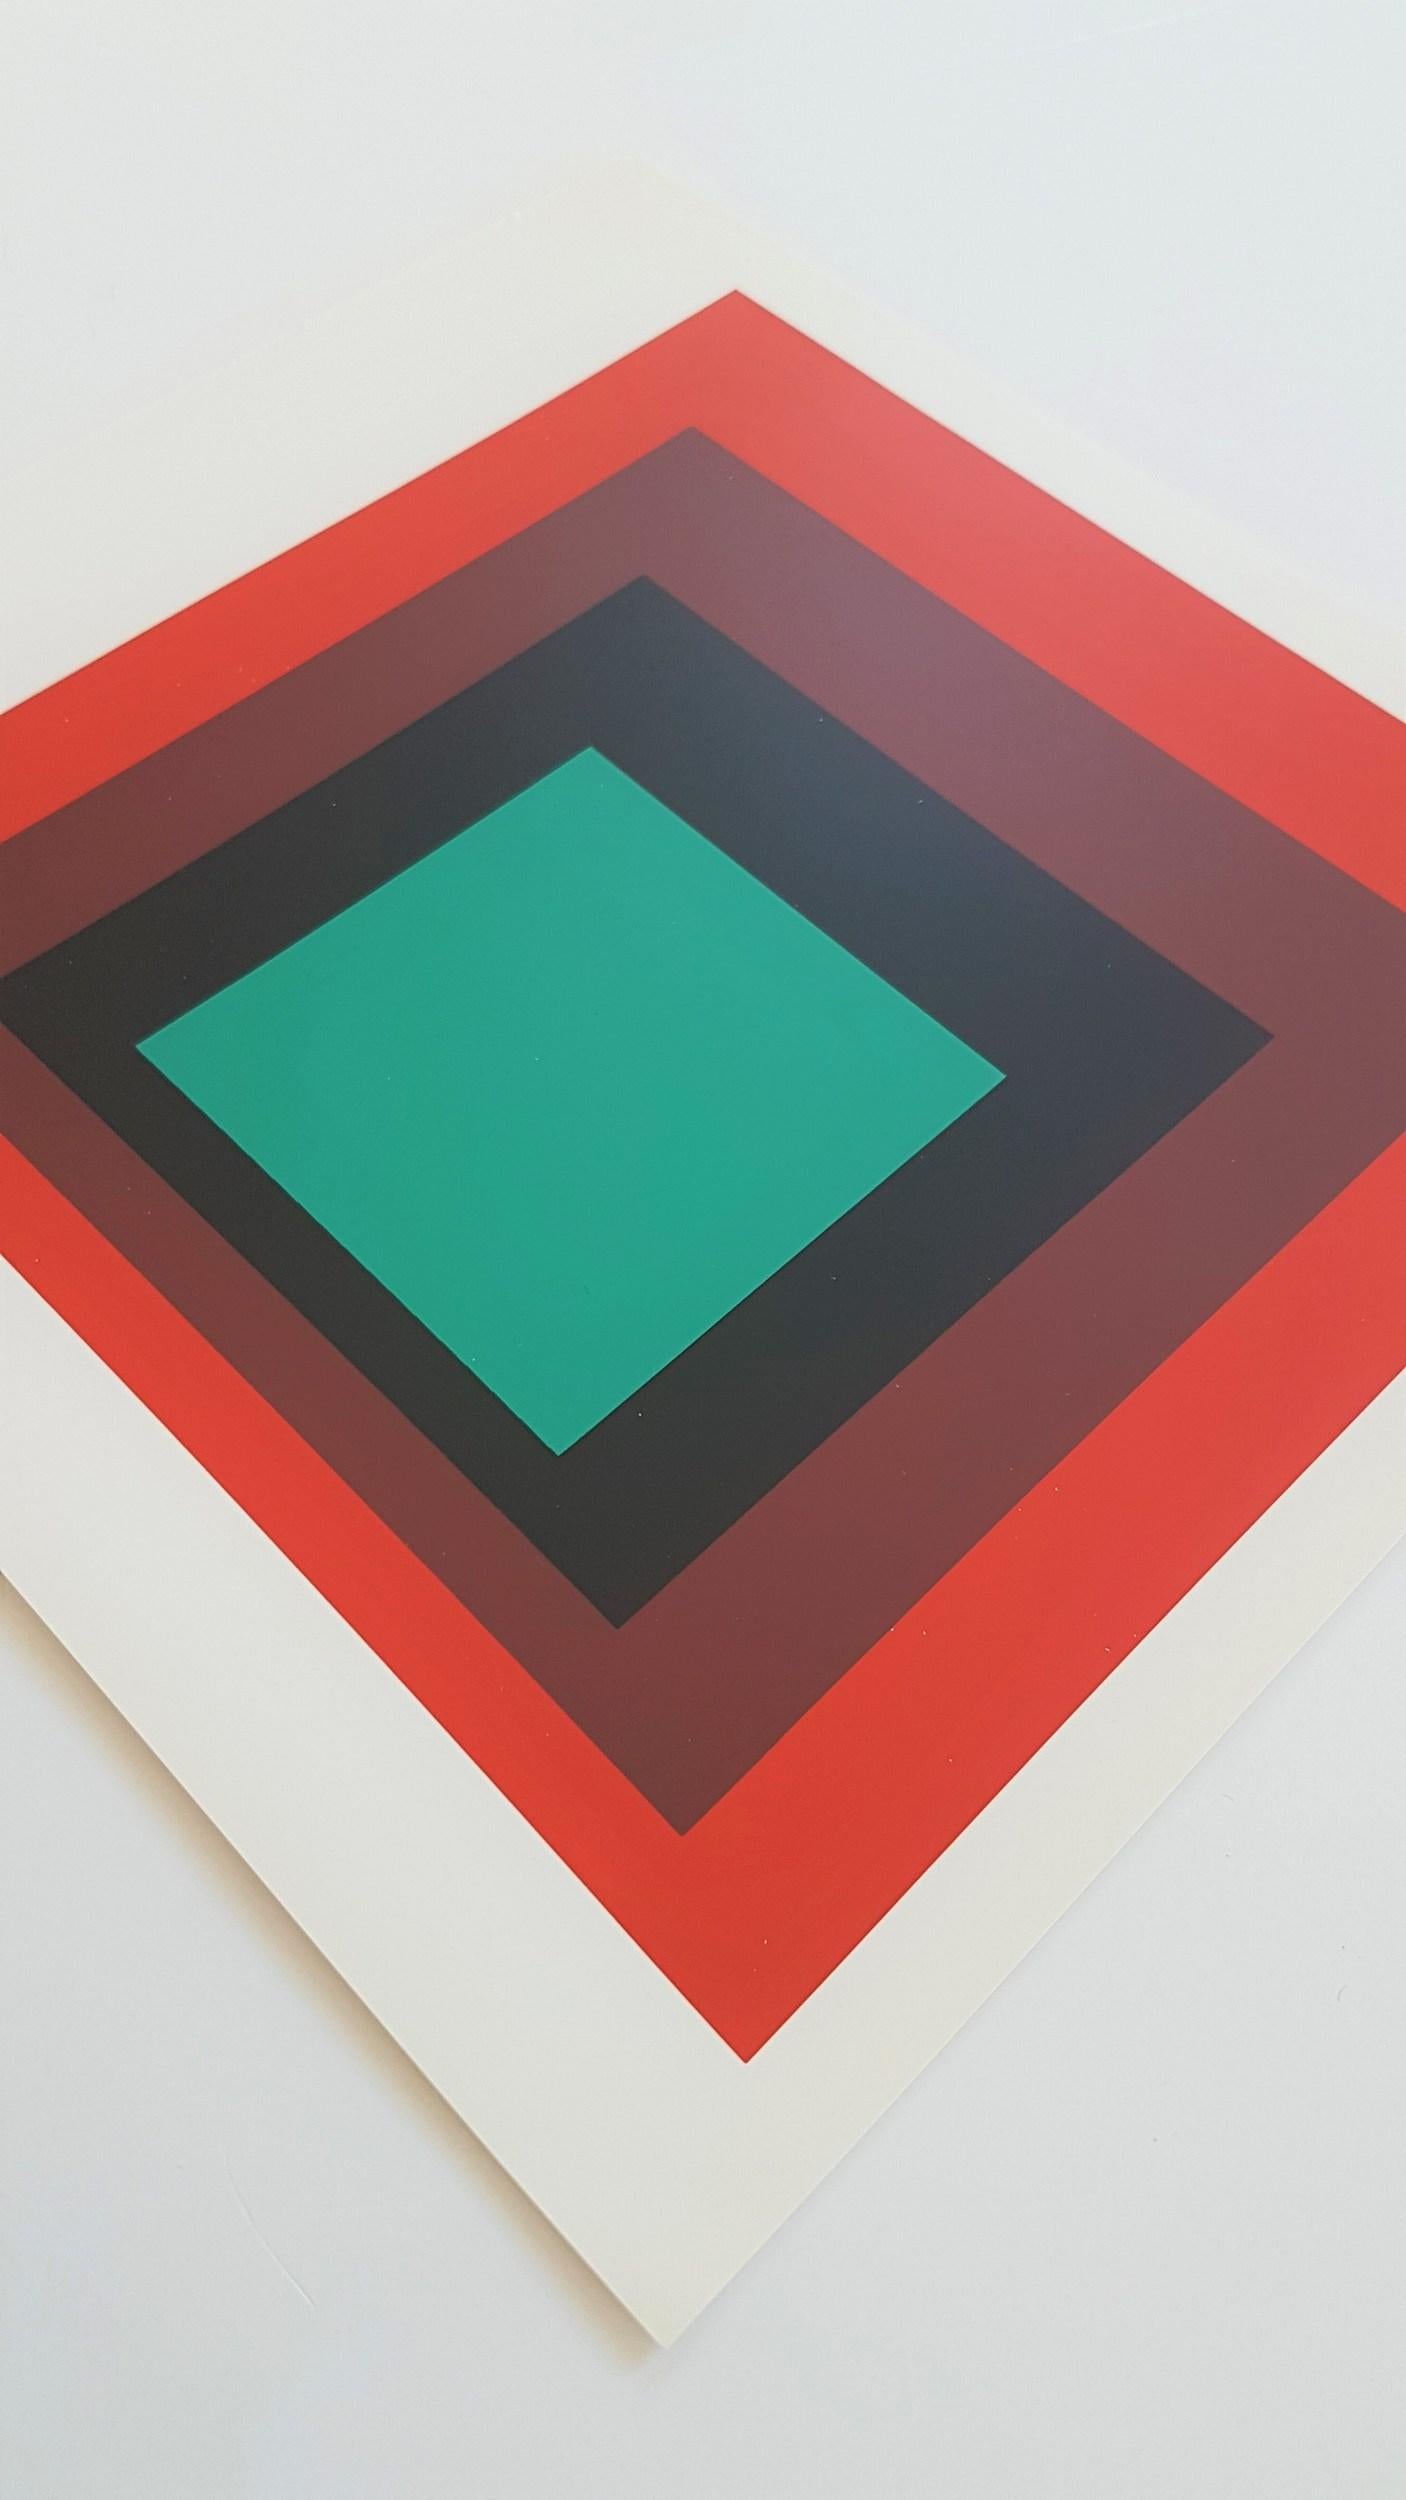 Homage to the Square - SET OF FIVE (Minimalism, Bauhaus, ~49% OFF LIST PRICE) For Sale 2